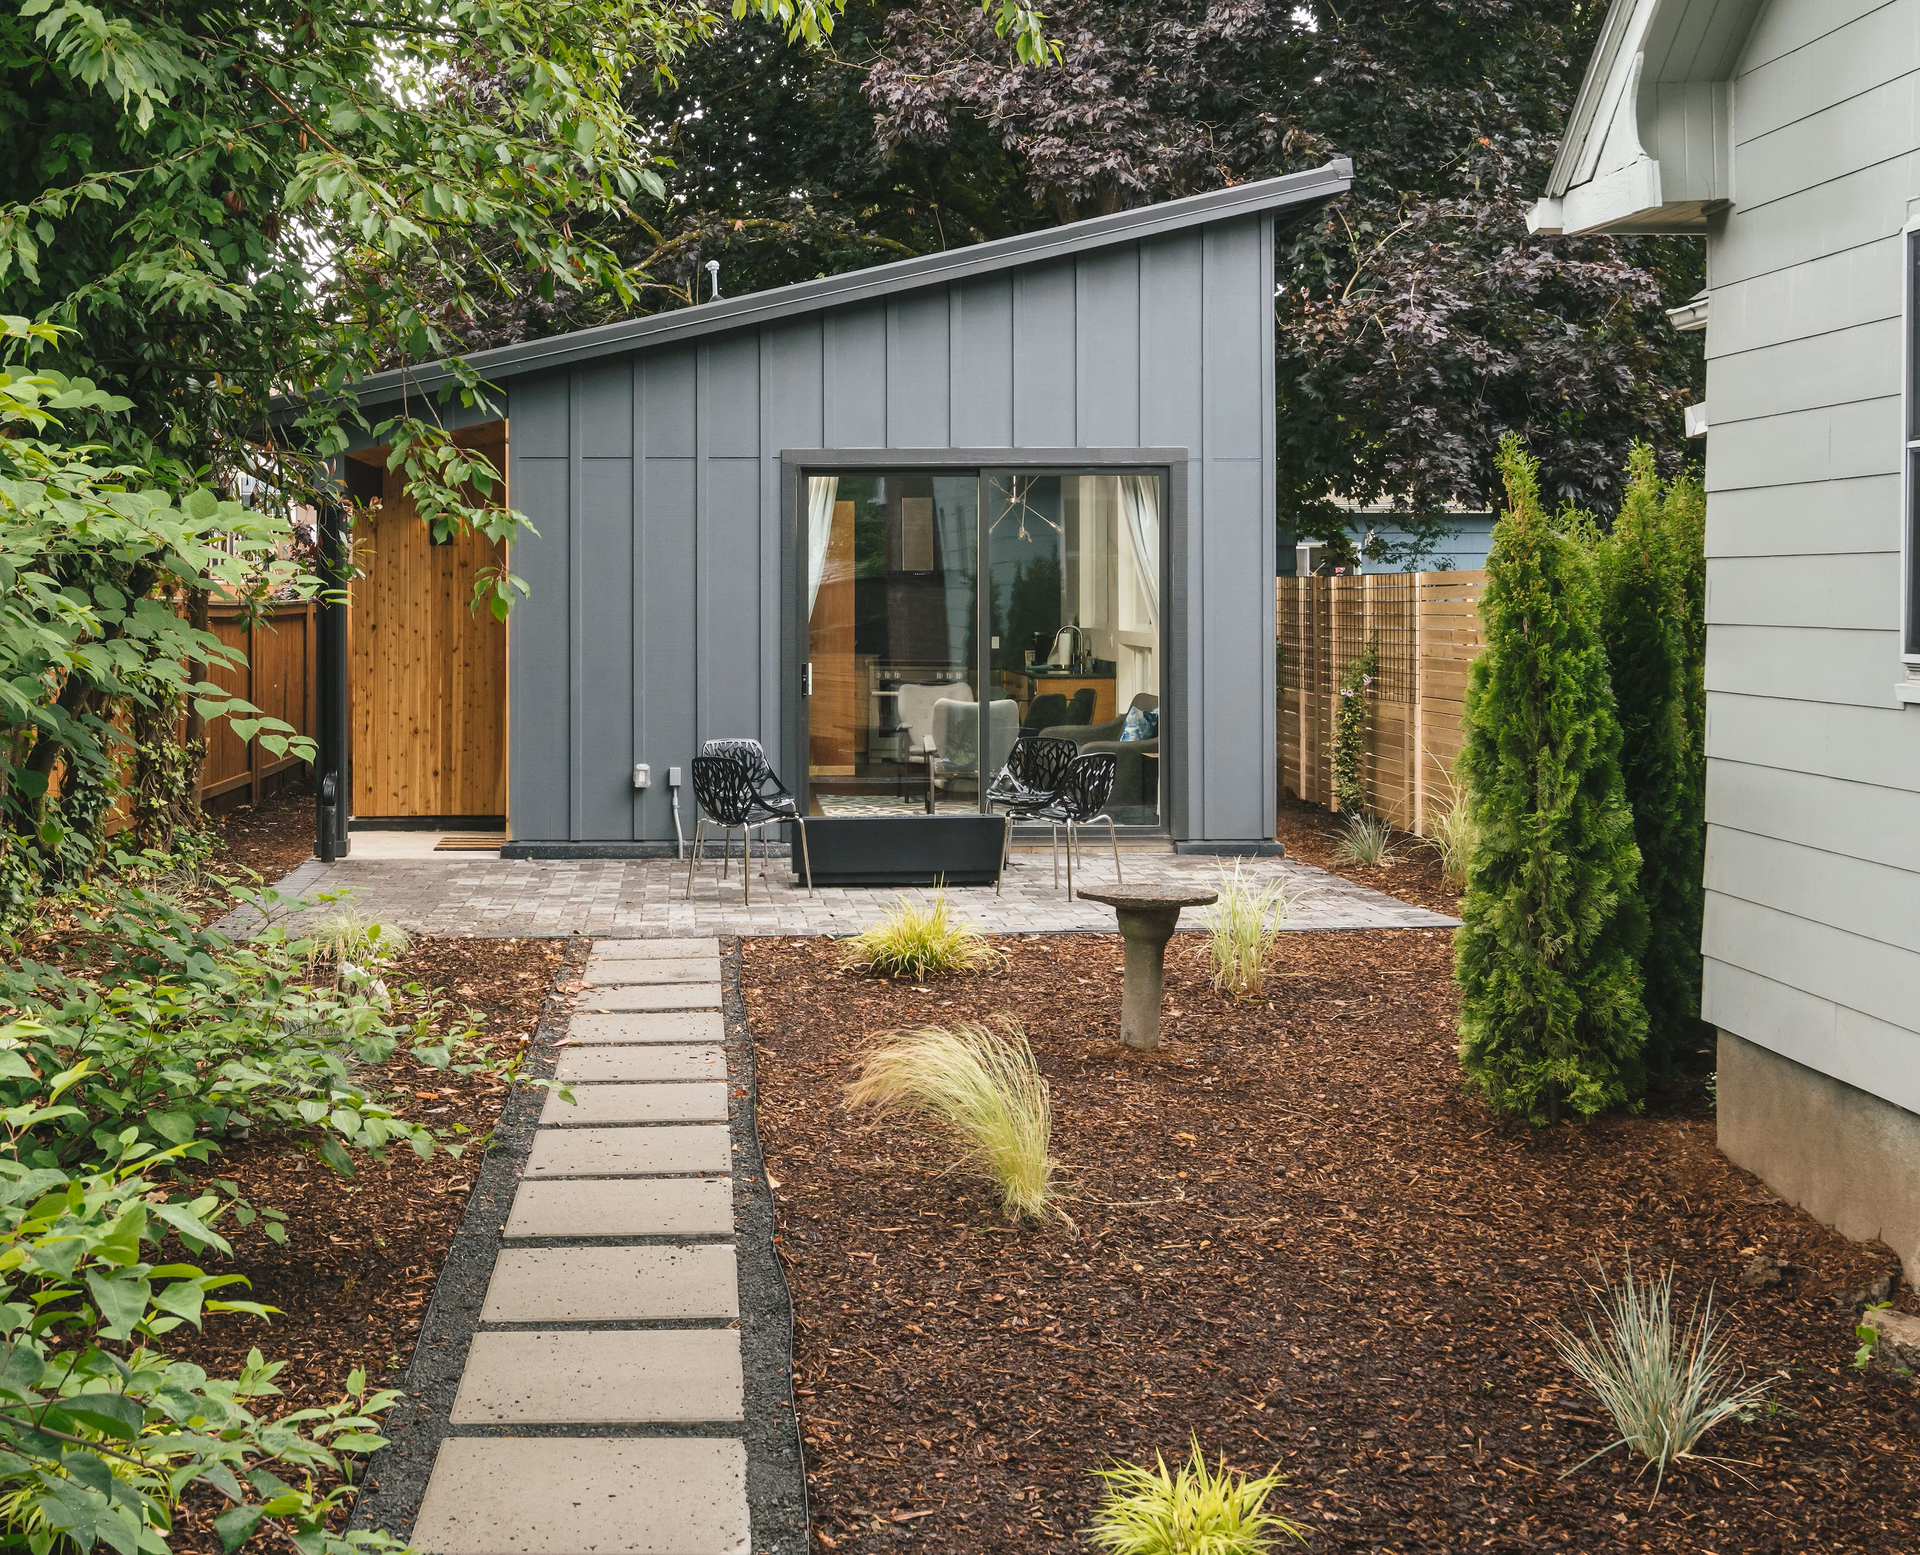 Exterior view of a tiny home, also known as an ADU (Accessory Dwelling Unit) or little house, nestled in a serene natural setting.